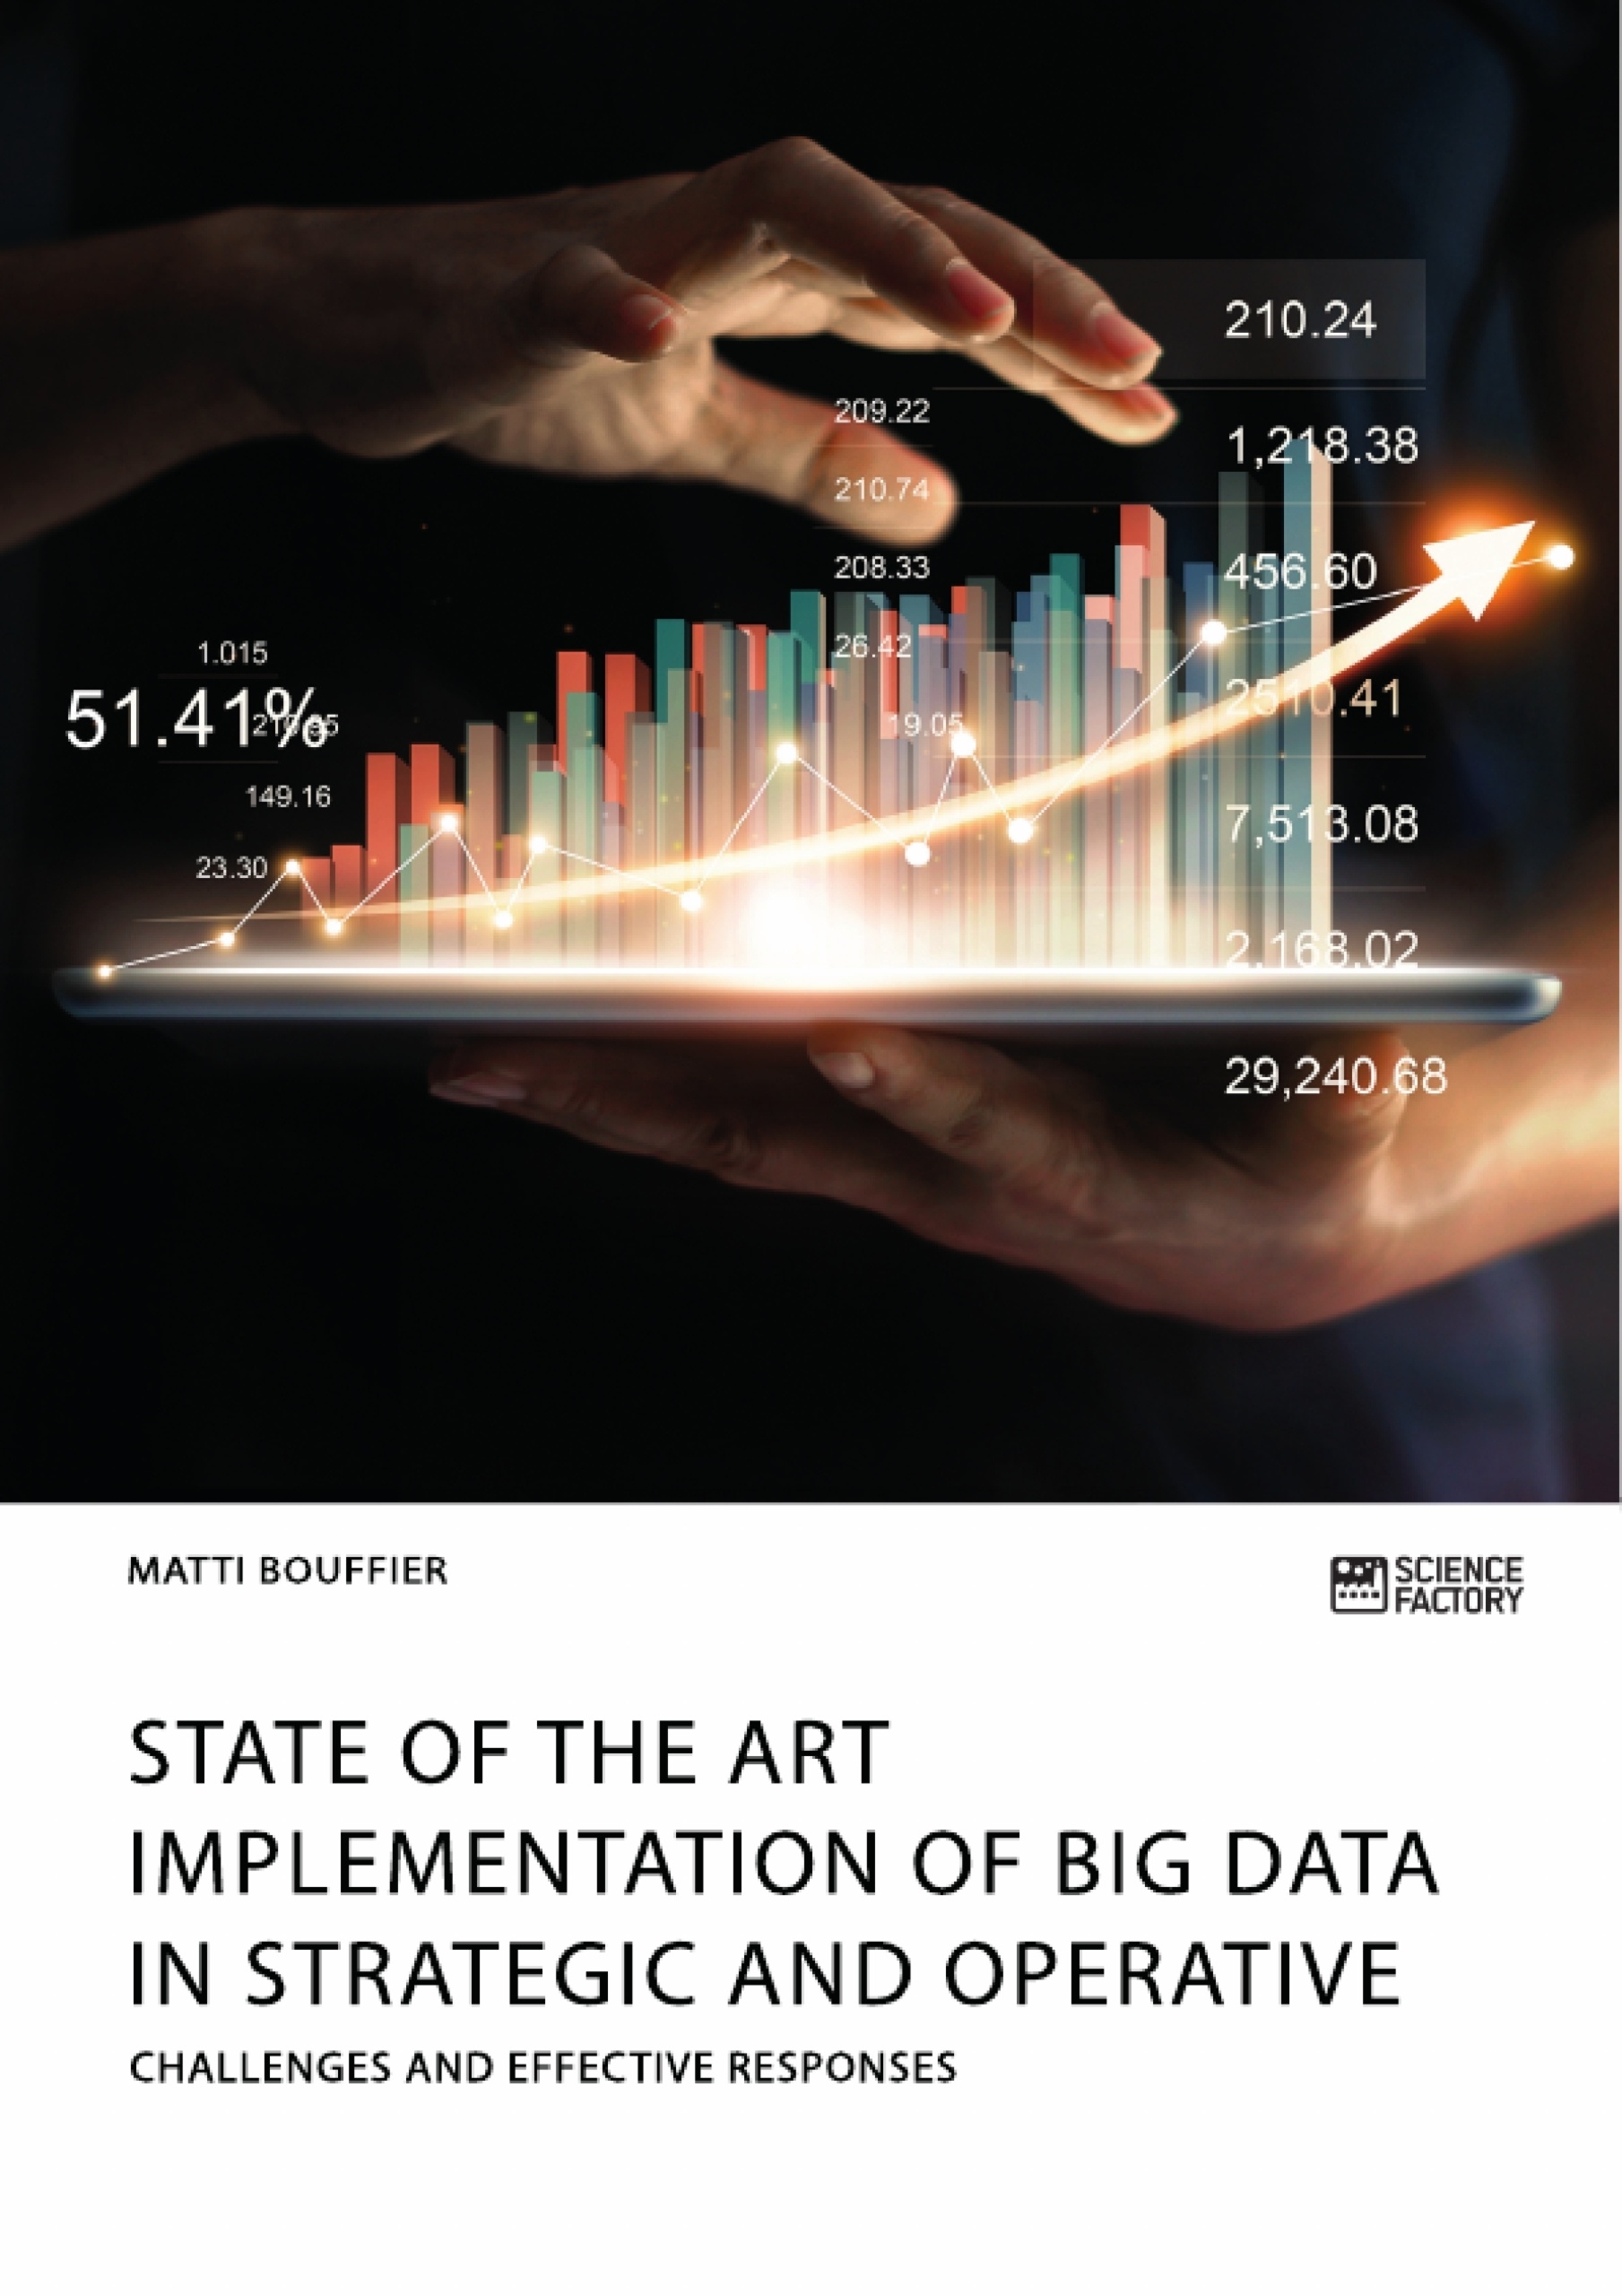 Title: State of the Art Implementation of Big Data in Strategic and Operative Marketing. Challenges and Effective Responses